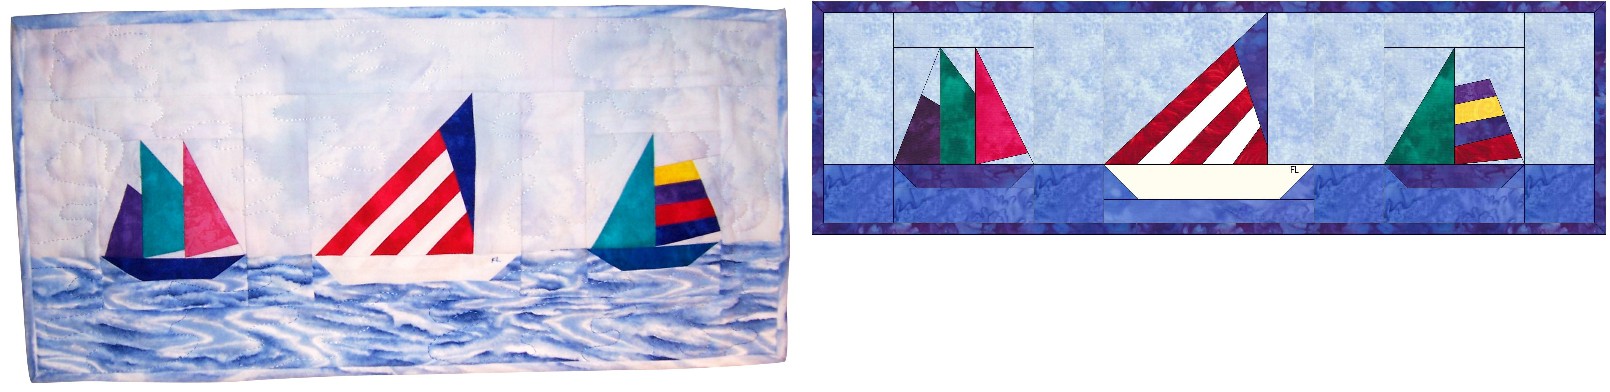 Sailboat By Mary Hartmann-Bowden | Quilt Gallery | DoYouEQ.com